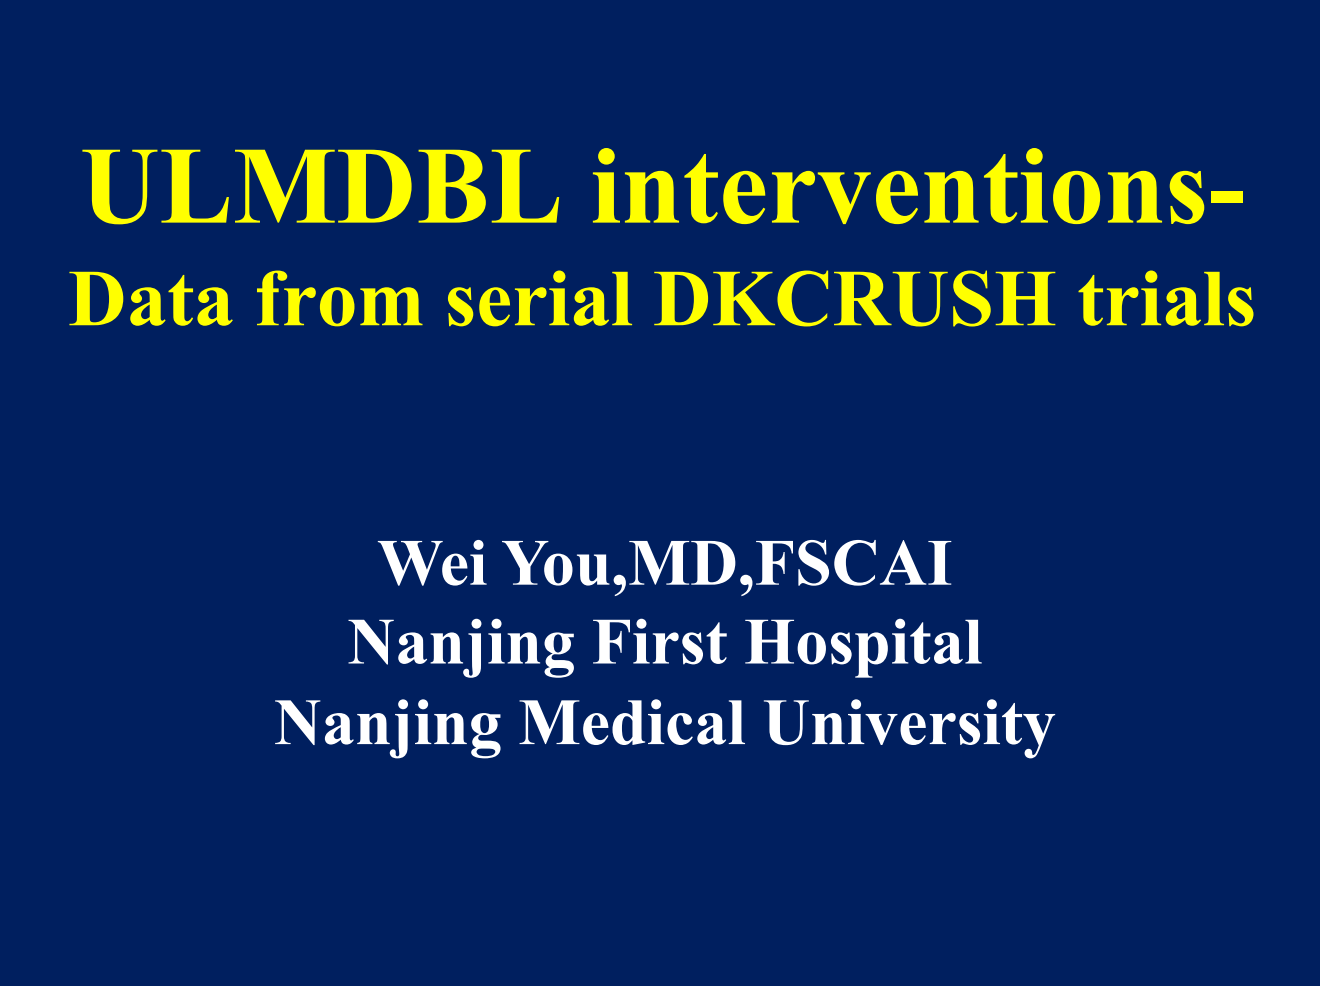 You are currently viewing ULMDBL interventions-Data from serial DK CRUSH trials